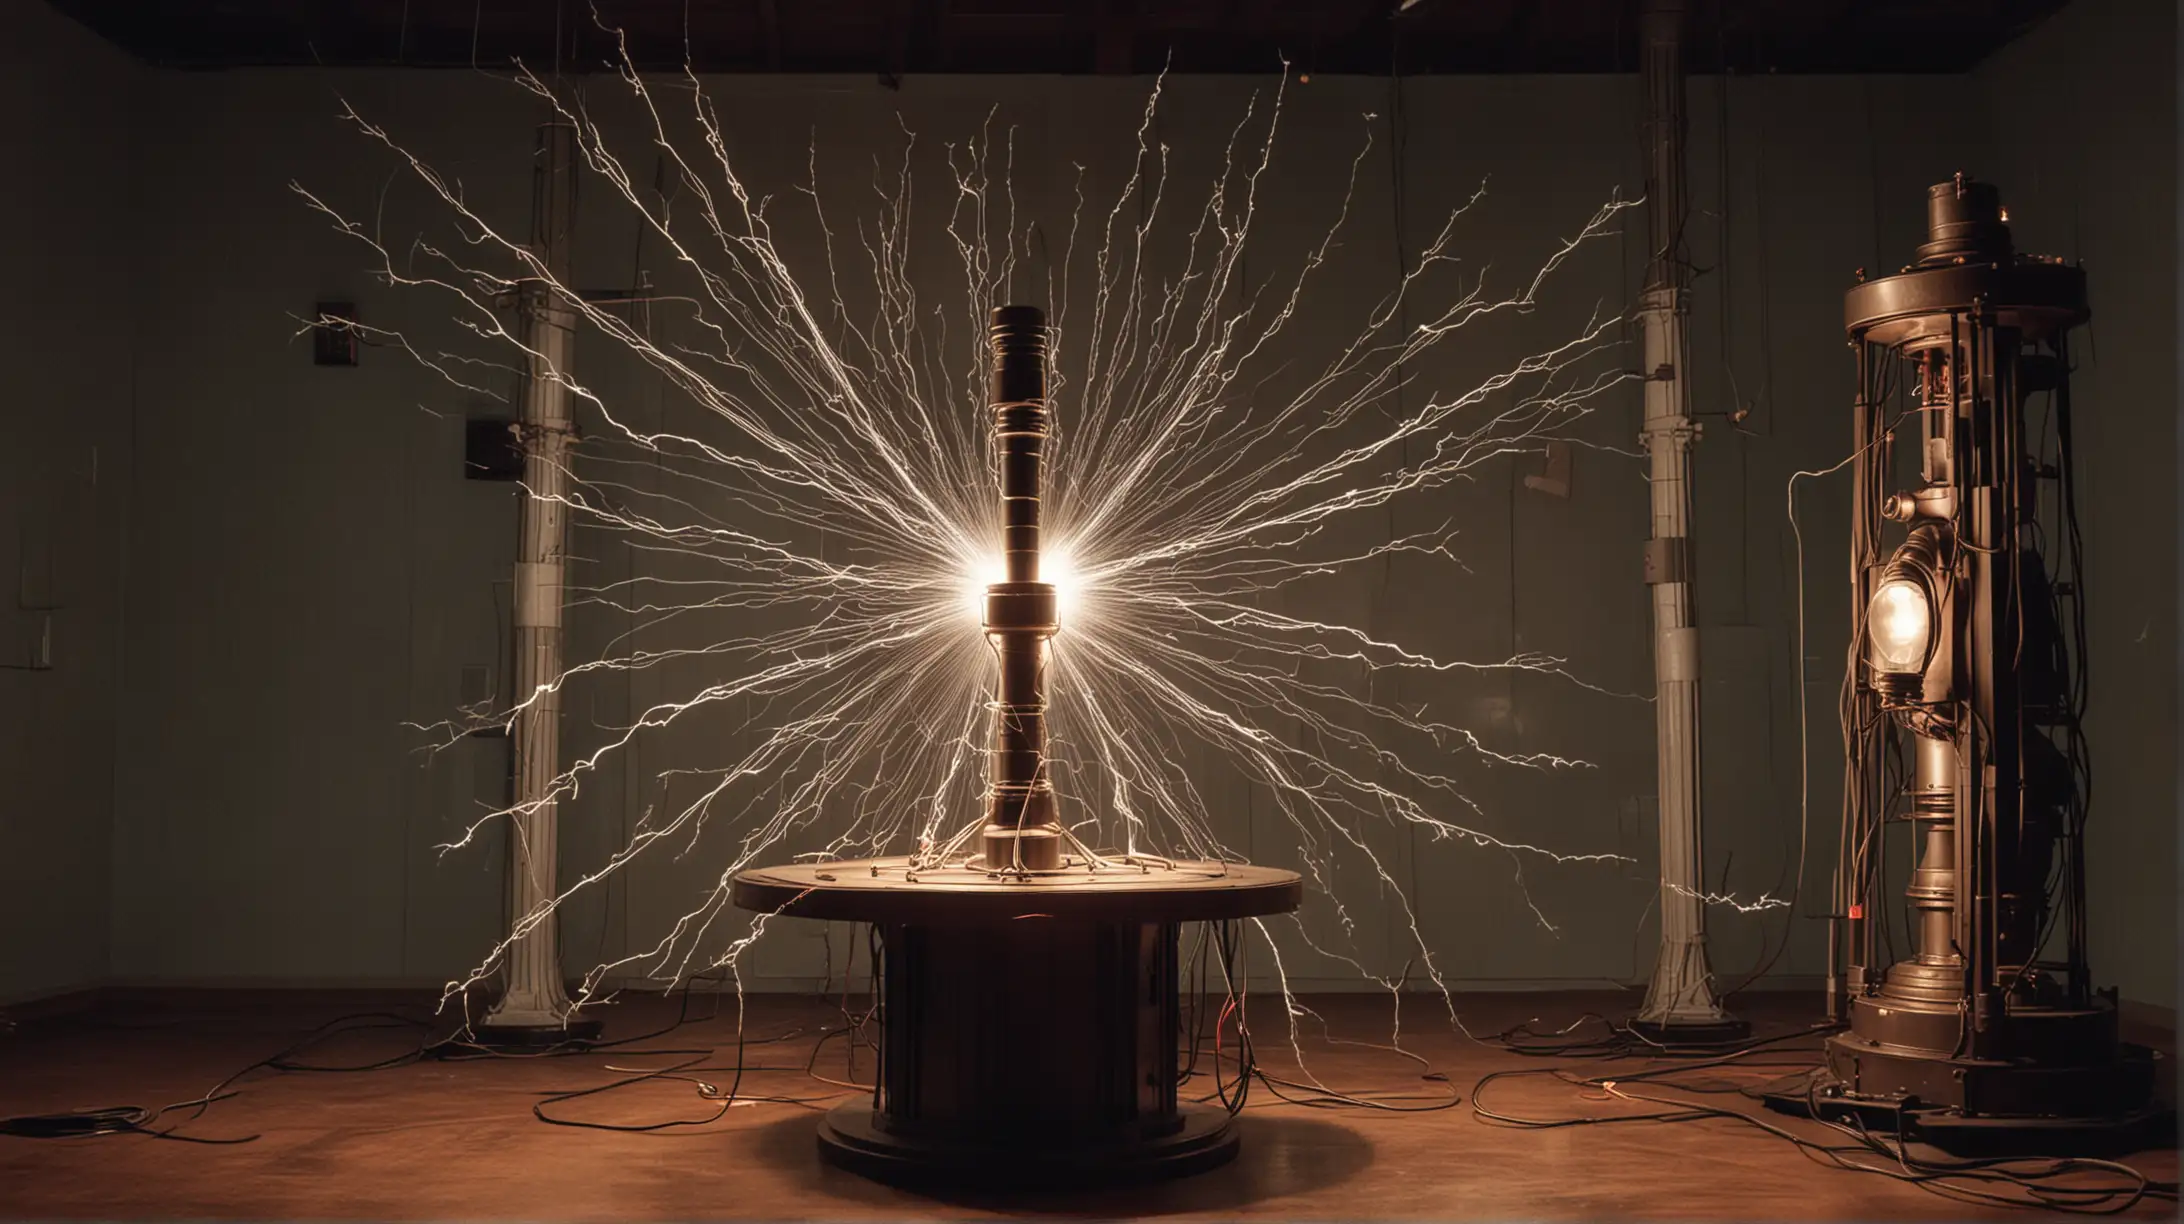 Visualize Tesla's Iconic Inventions:nnImage Description: Generate a dynamic scene showcasing Nikola Tesla surrounded by his inventions such as the Tesla Coil, AC motor, and Wardenclyffe Tower, highlighting his revolutionary contributions to electrical engineering.